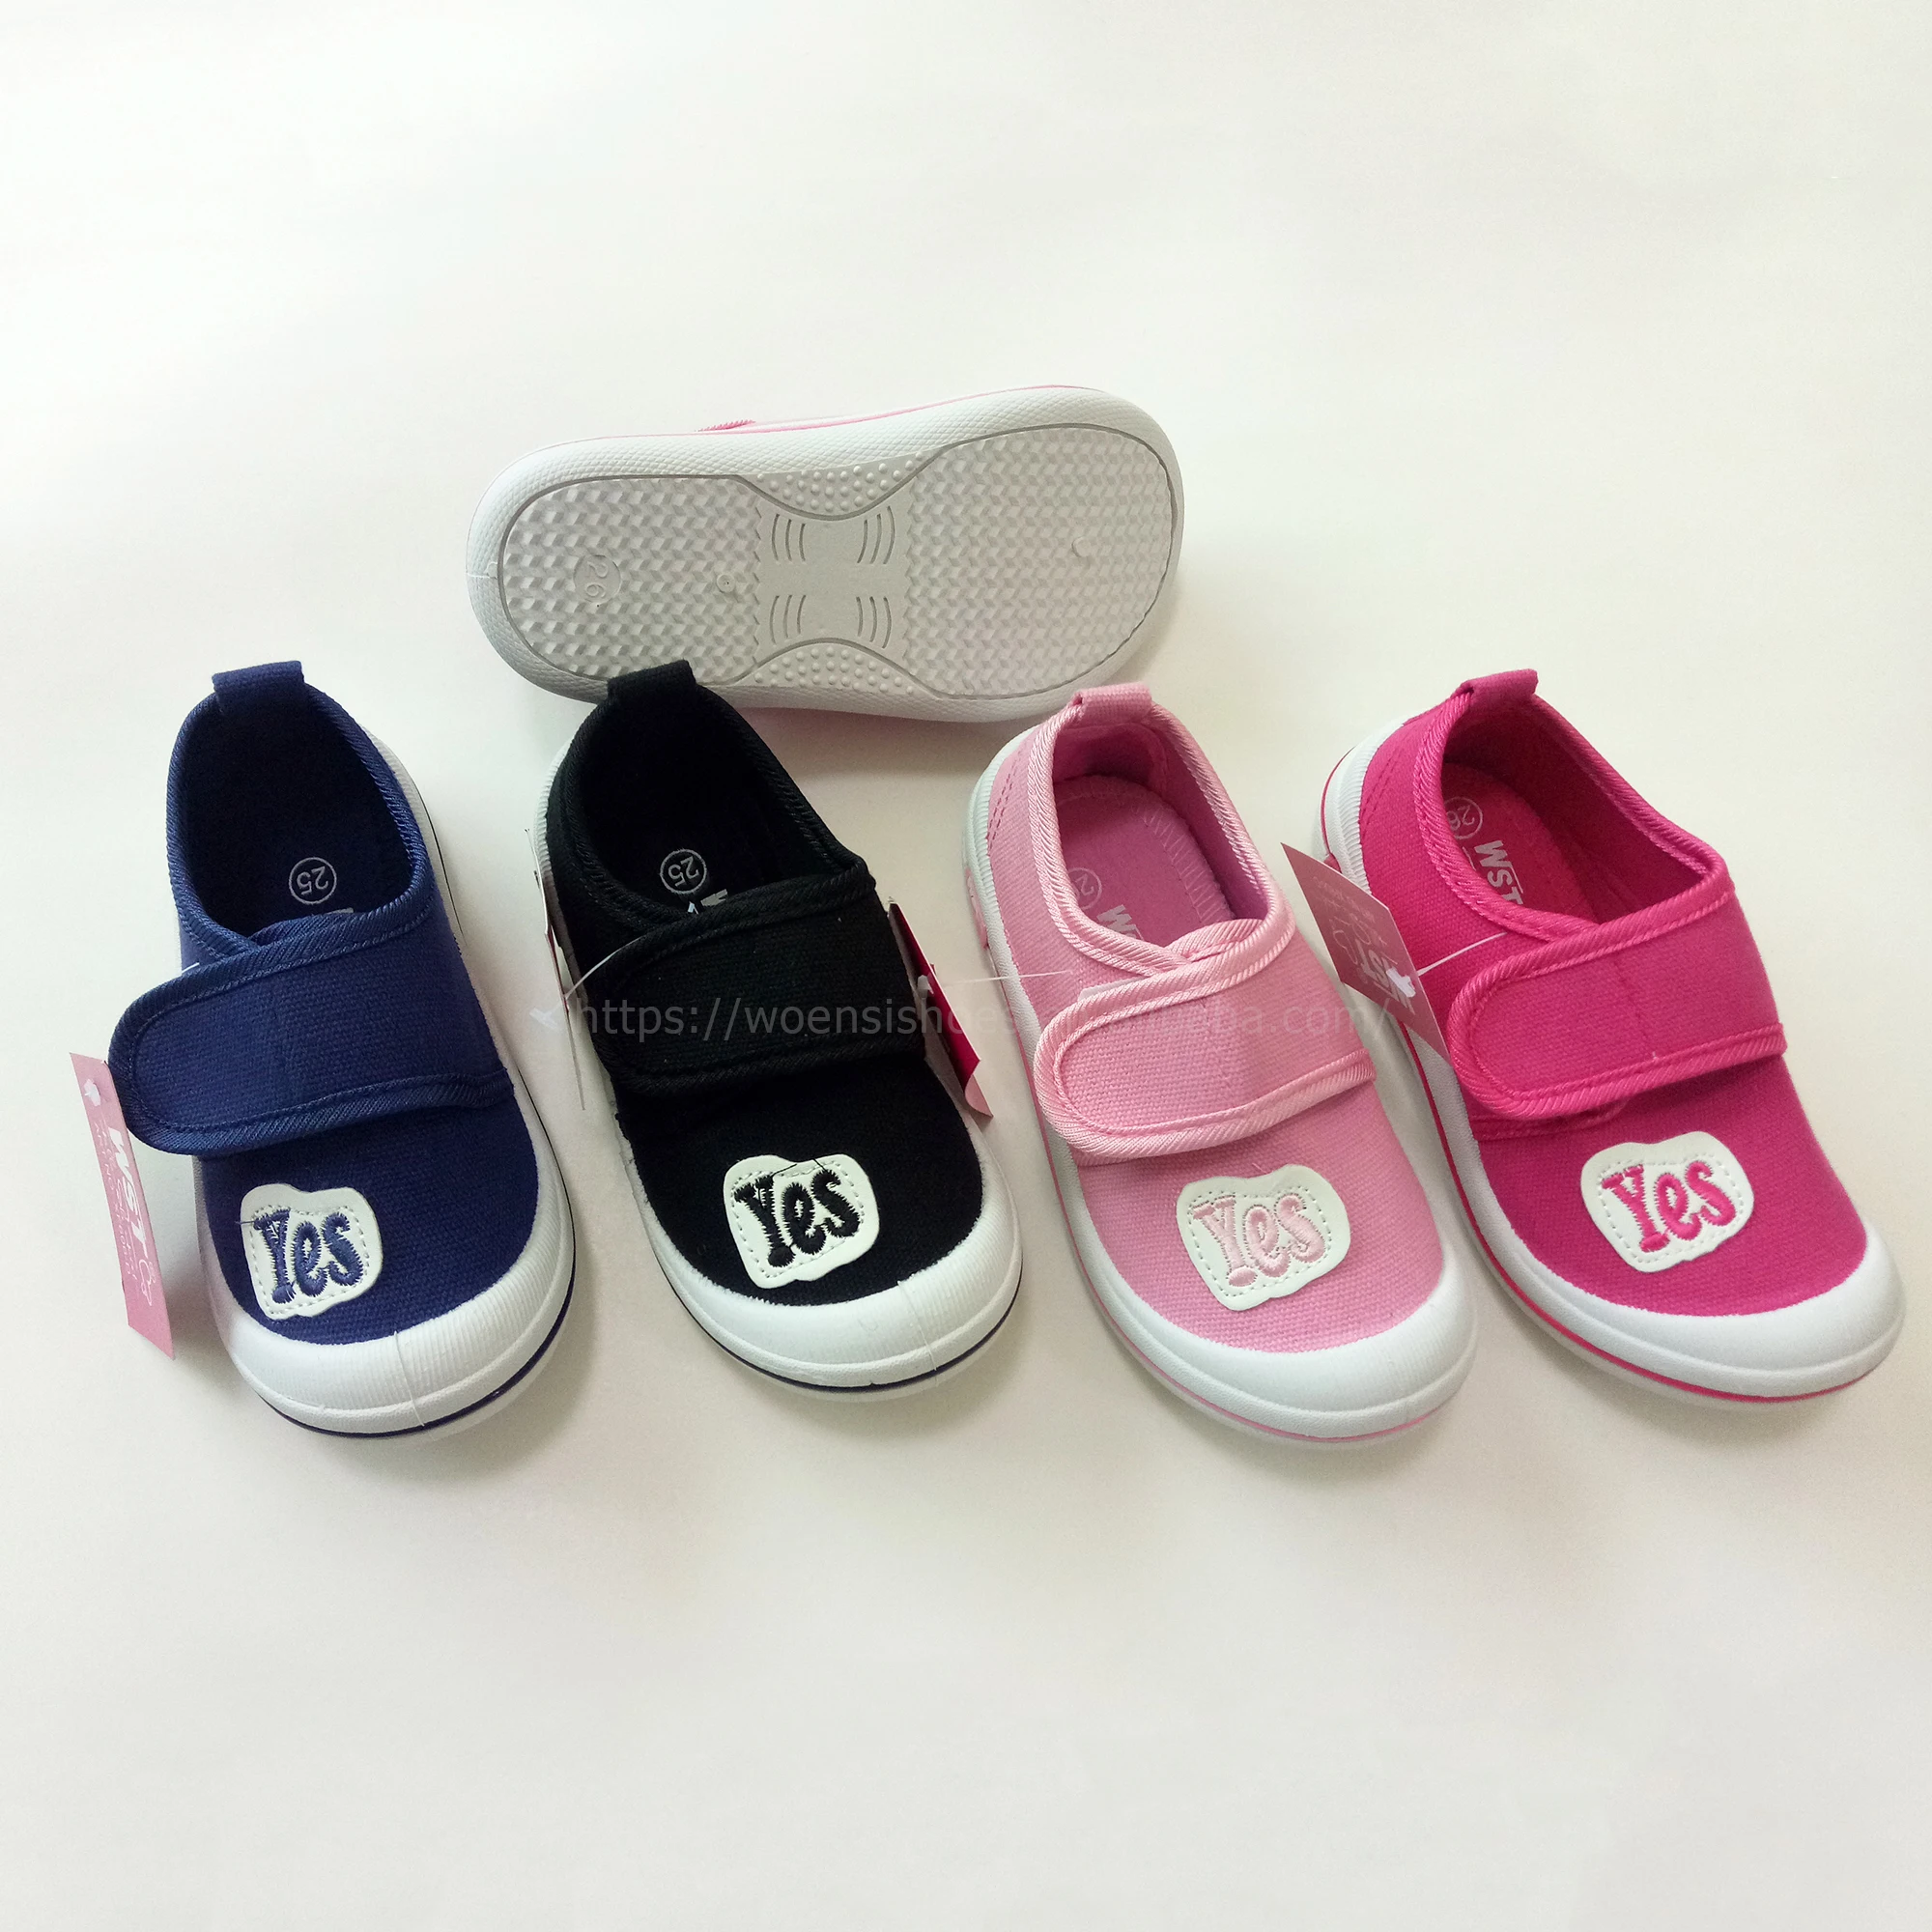 new fashion low price oem canvas shoes kids injection casual shoes children